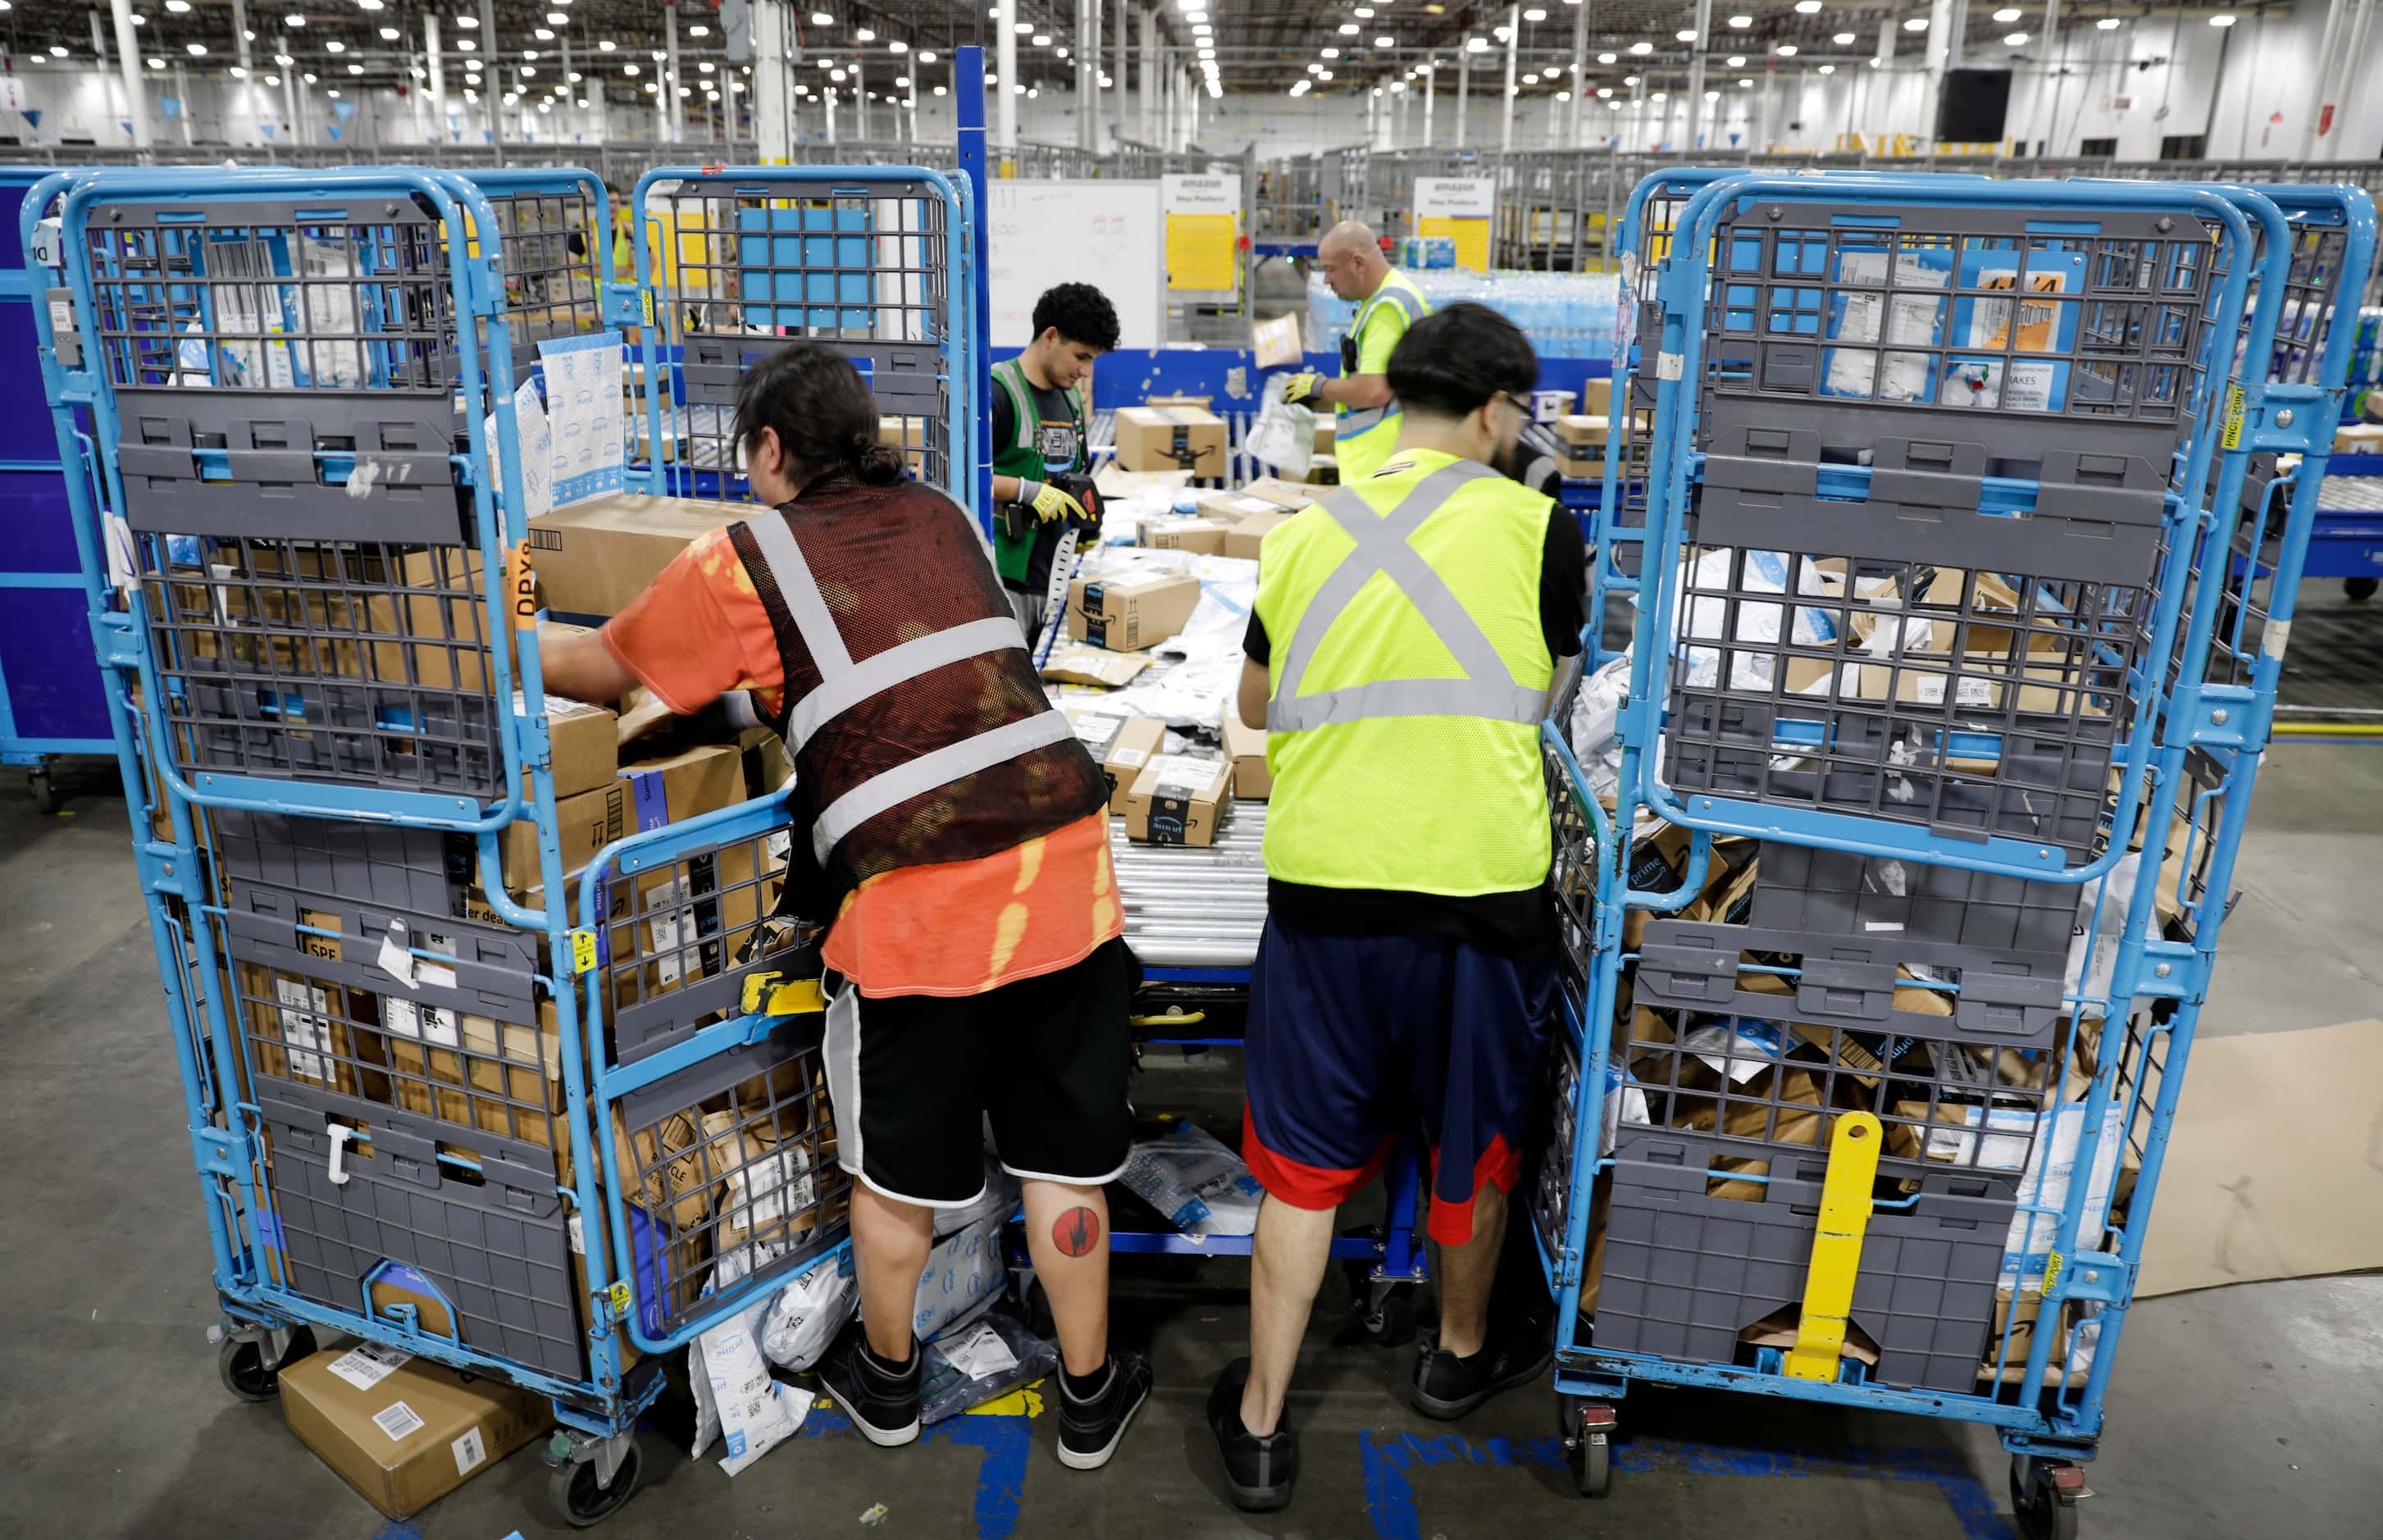 Crew members unload carts of early PRIME day deal packages after they arrived on trucks at...